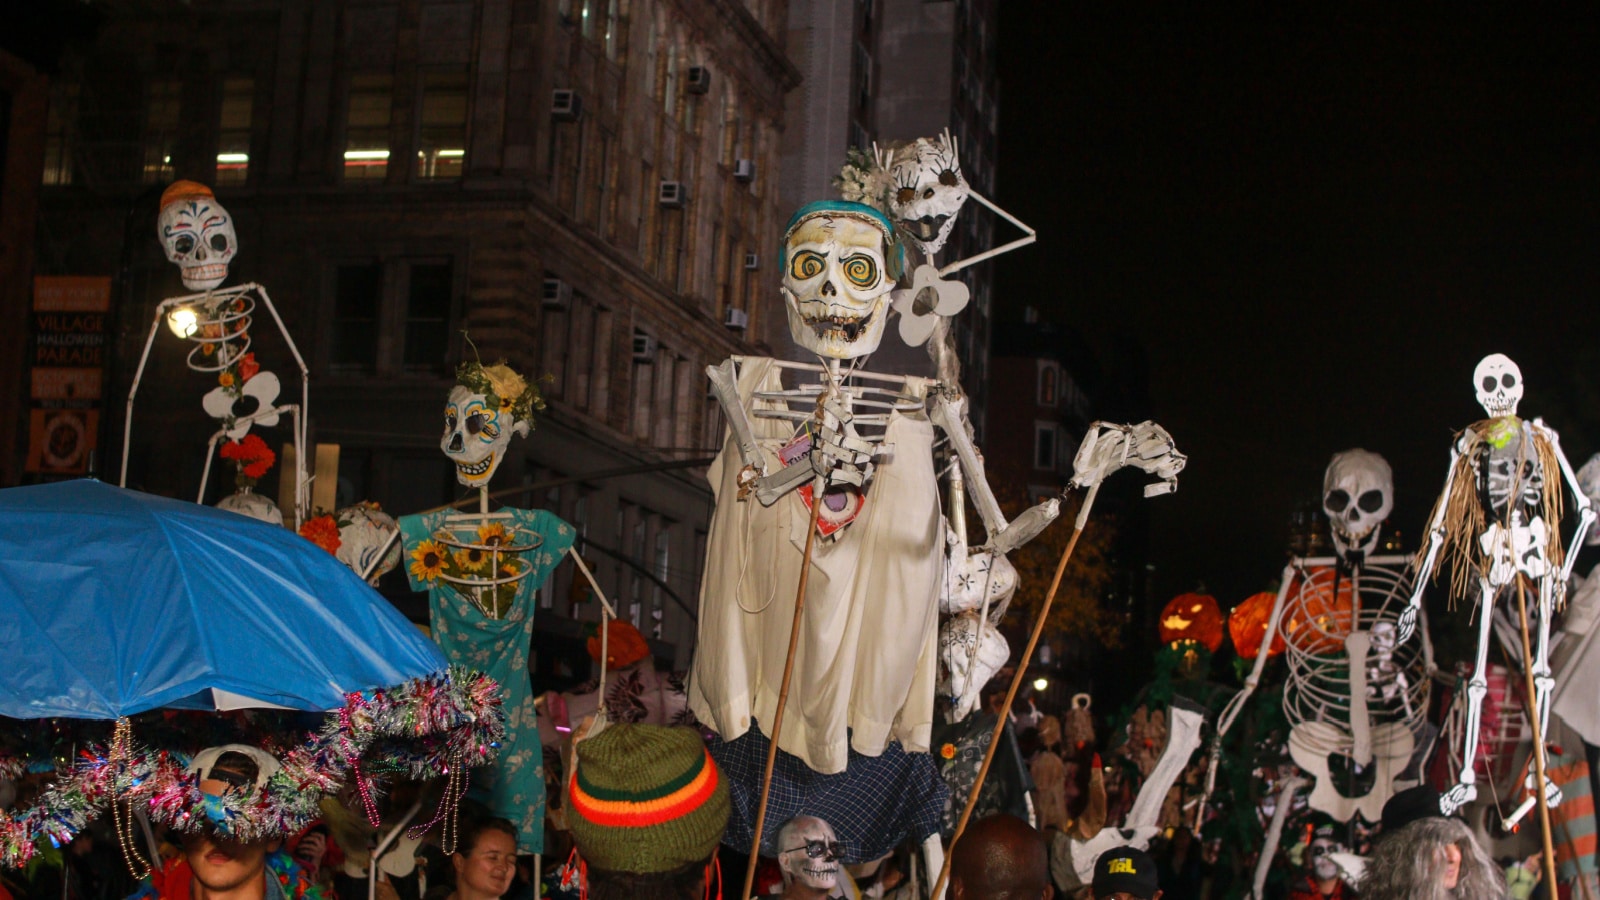 New York , New York /USA - 10/31/2019 New York City Halloween Parade marching up 6th ave.